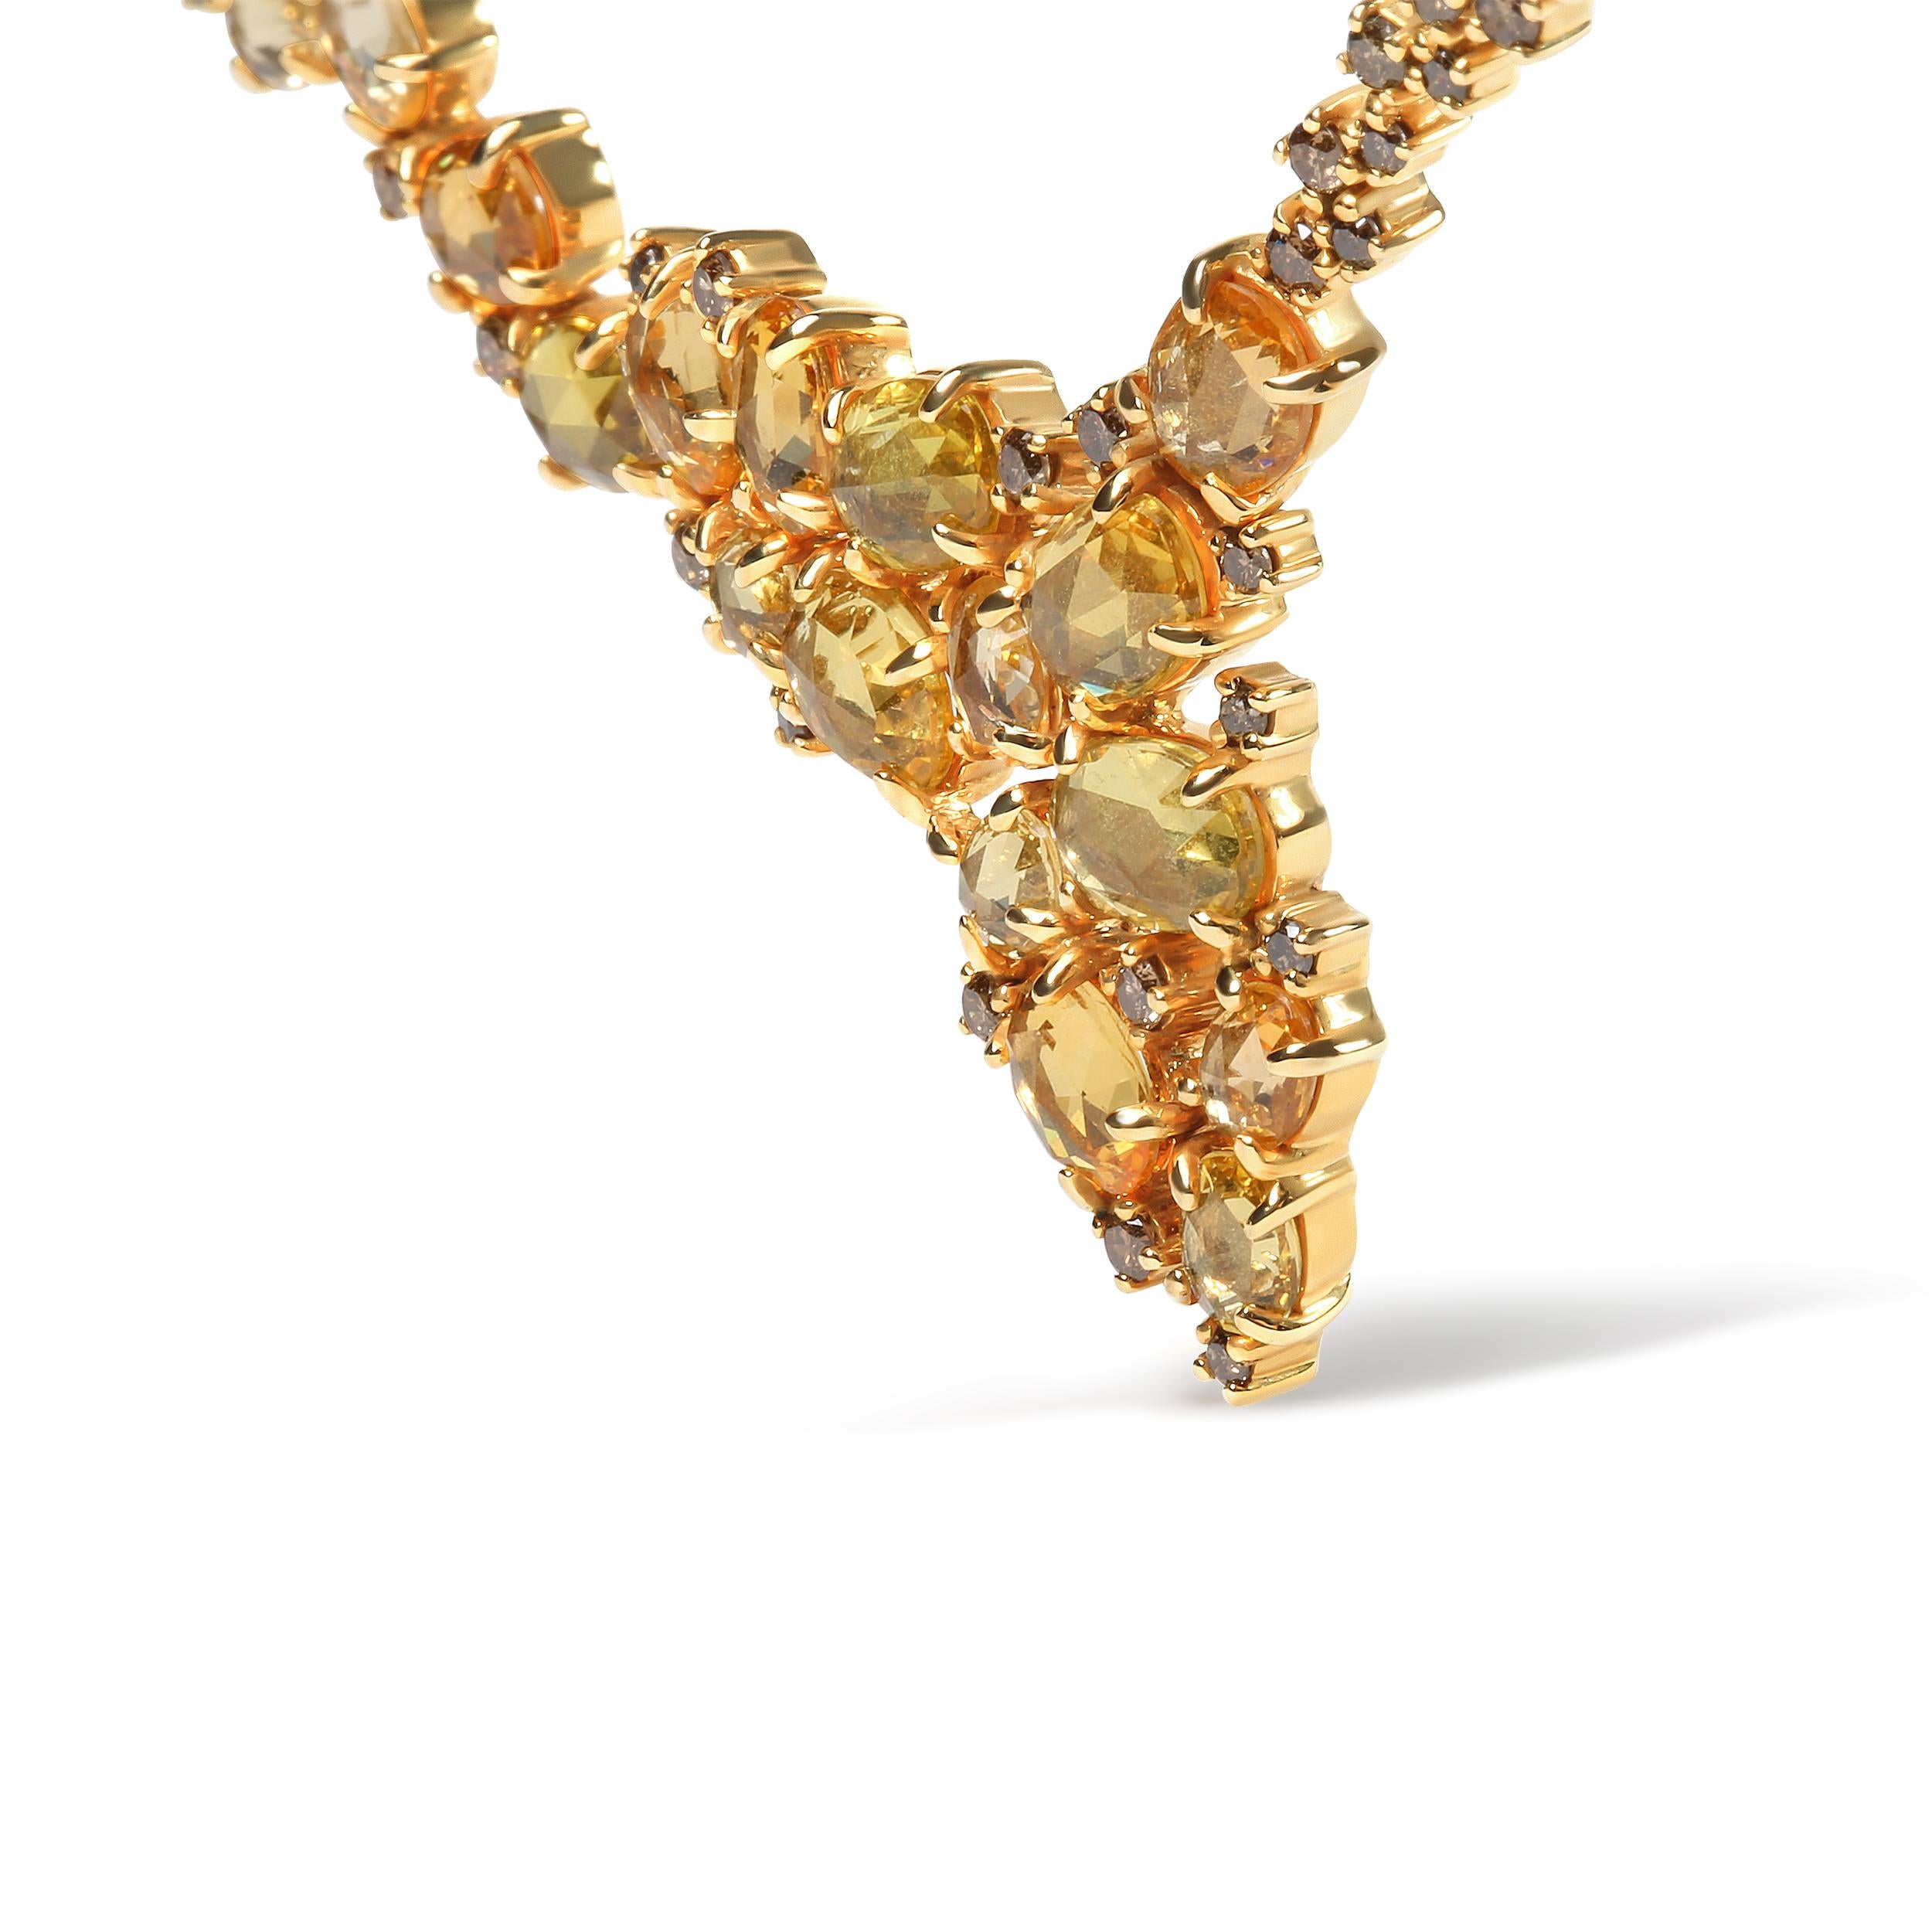 A perfect look for both day and night, this 18k yellow gold station necklace is illuminated by the sparkle of natural gemstones and diamonds in a clustered cascading waterfall design. A scattered arrangement of natural oval heat-treated yellow